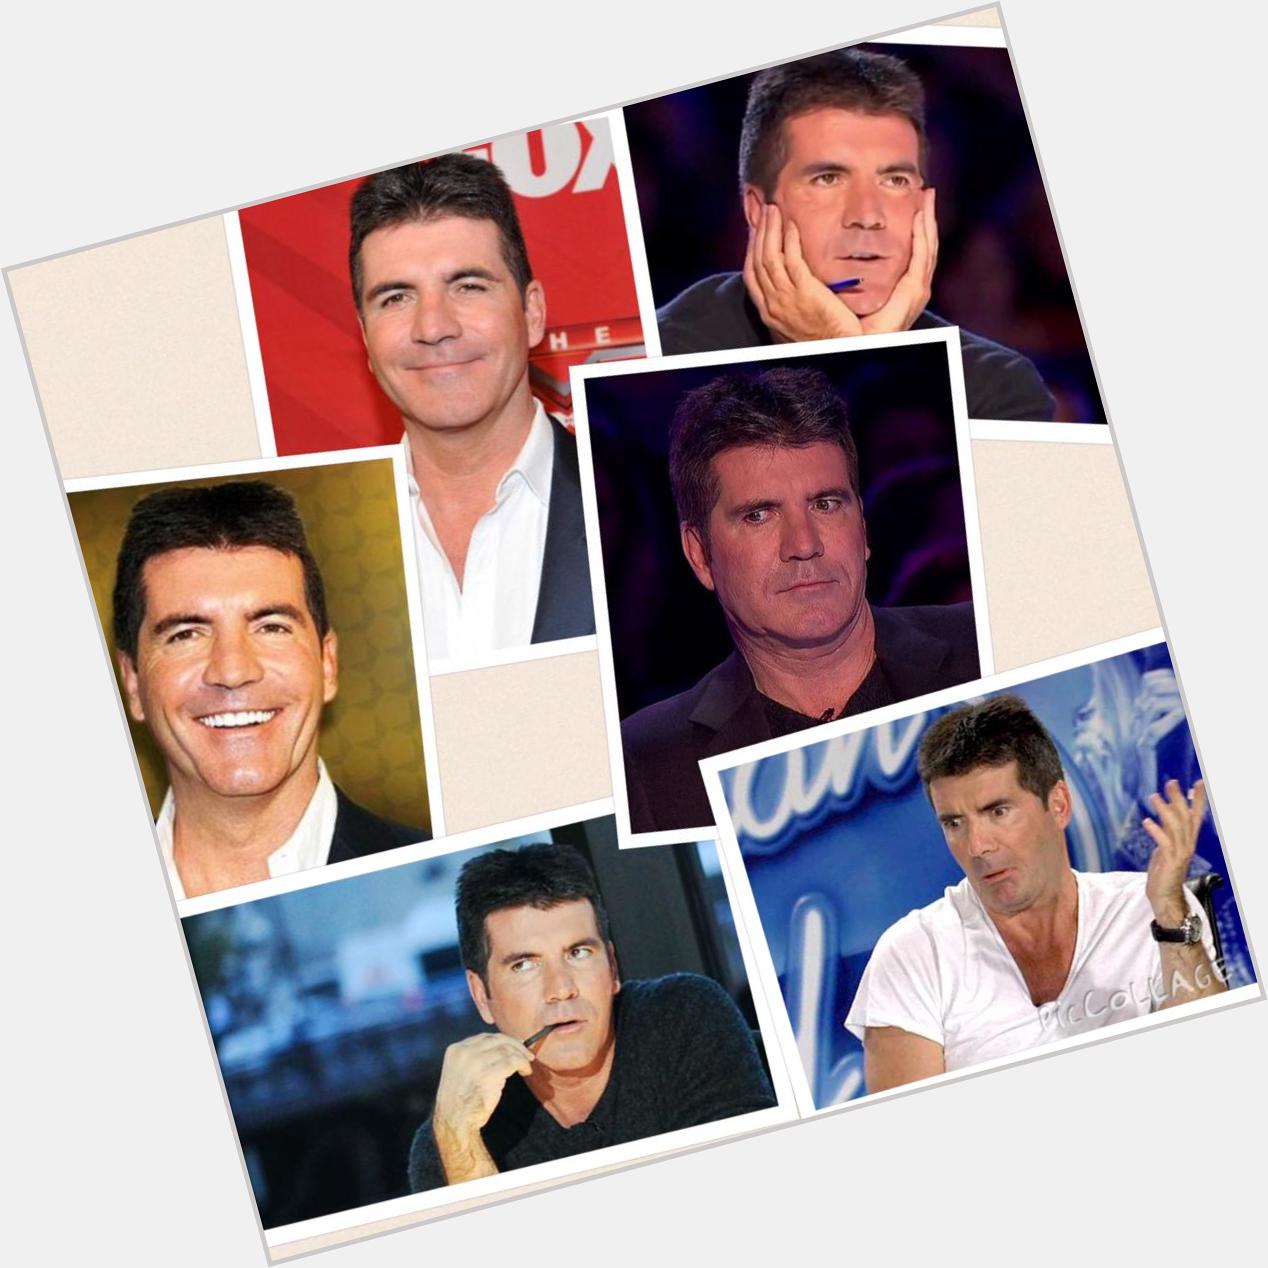 Happy birthday Simon Cowell, you are the real mvp 